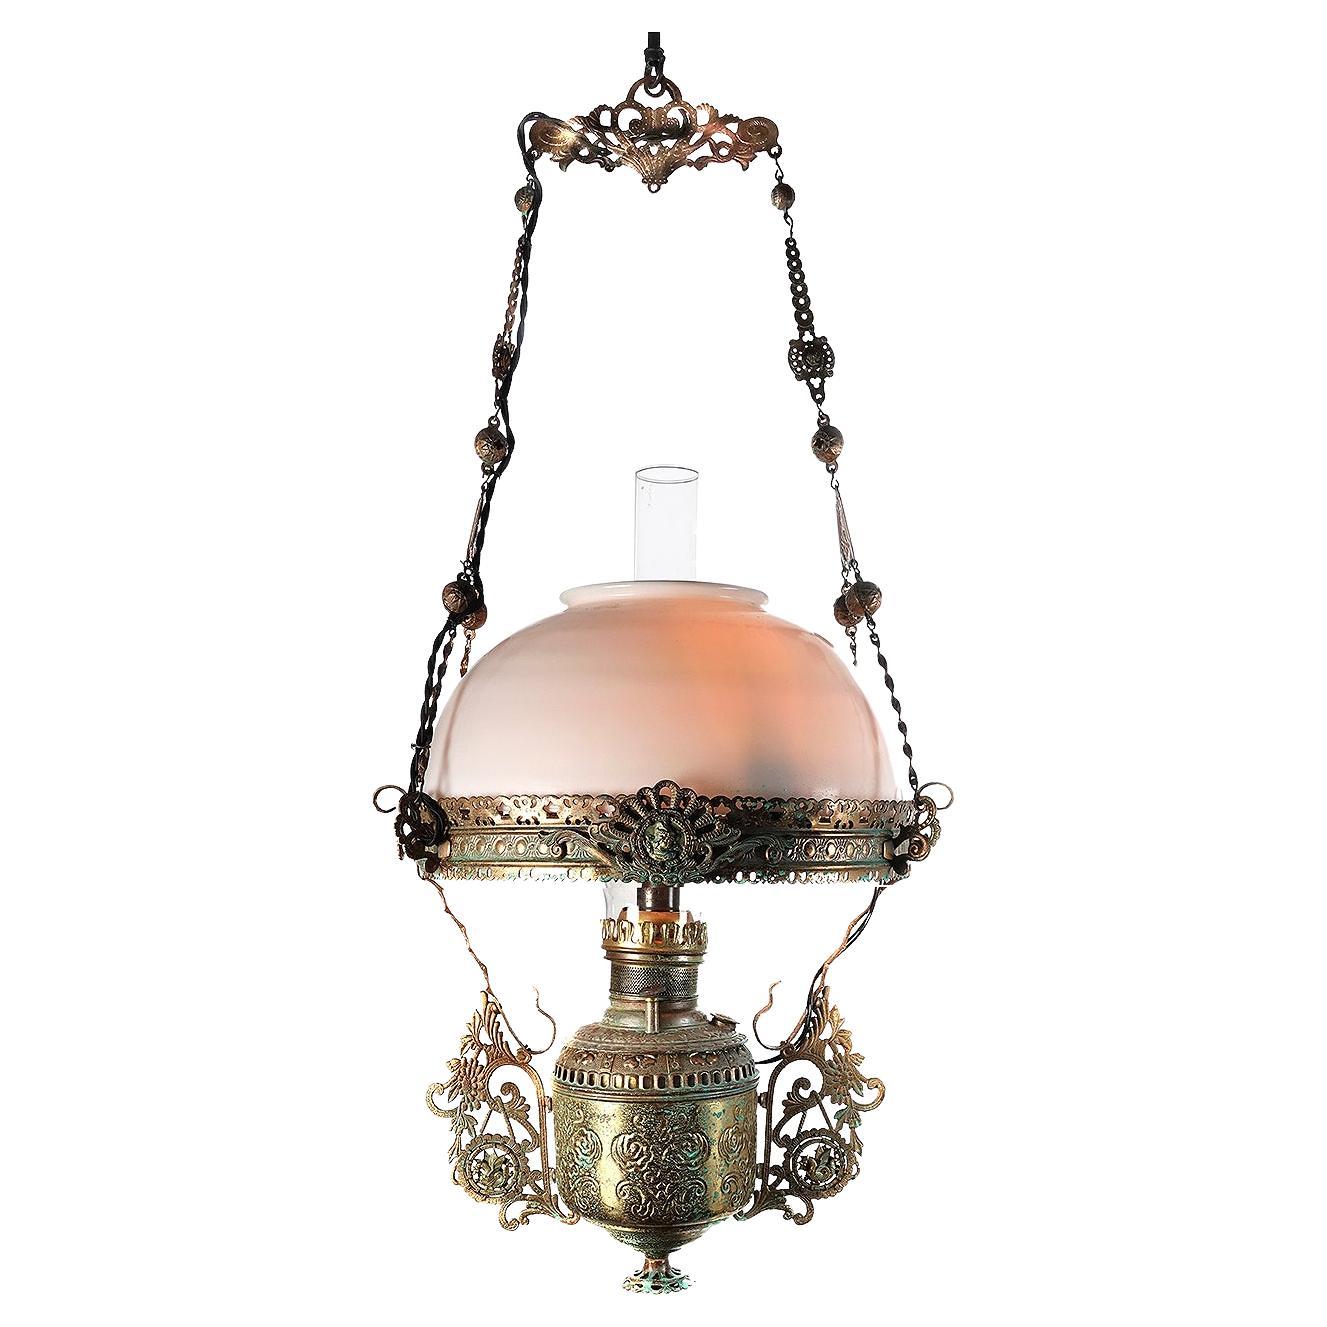 Highly Detailed 1880s Oil Lamp, Electrified For Sale